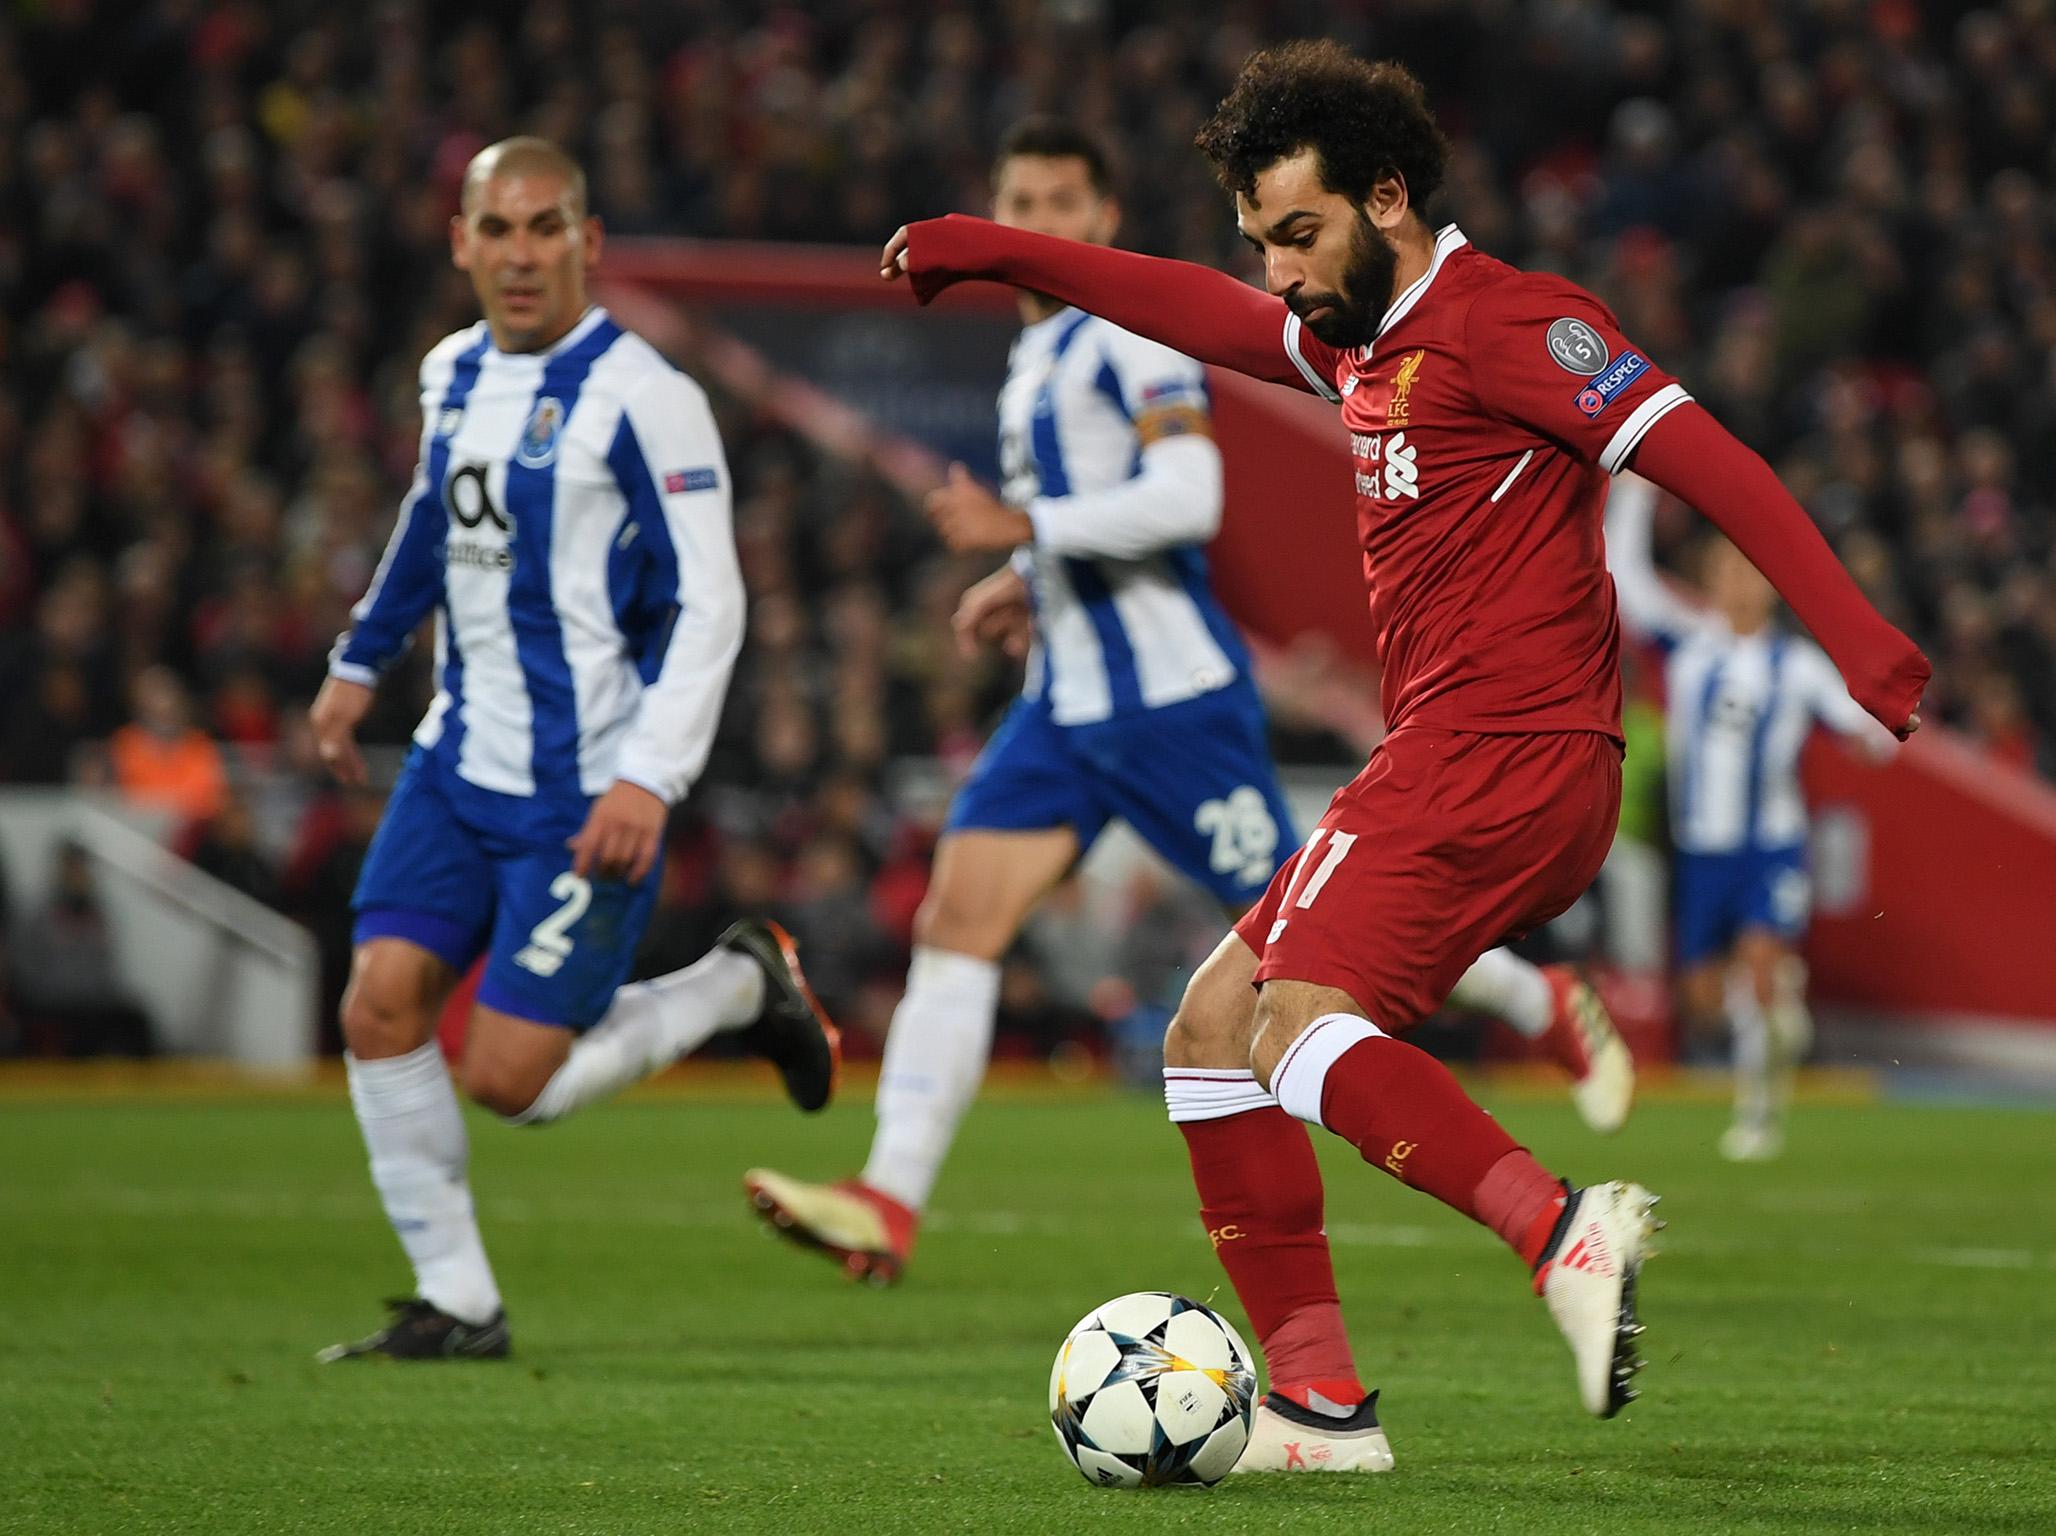 Salah's goal will be essential if Liverpool are to win it